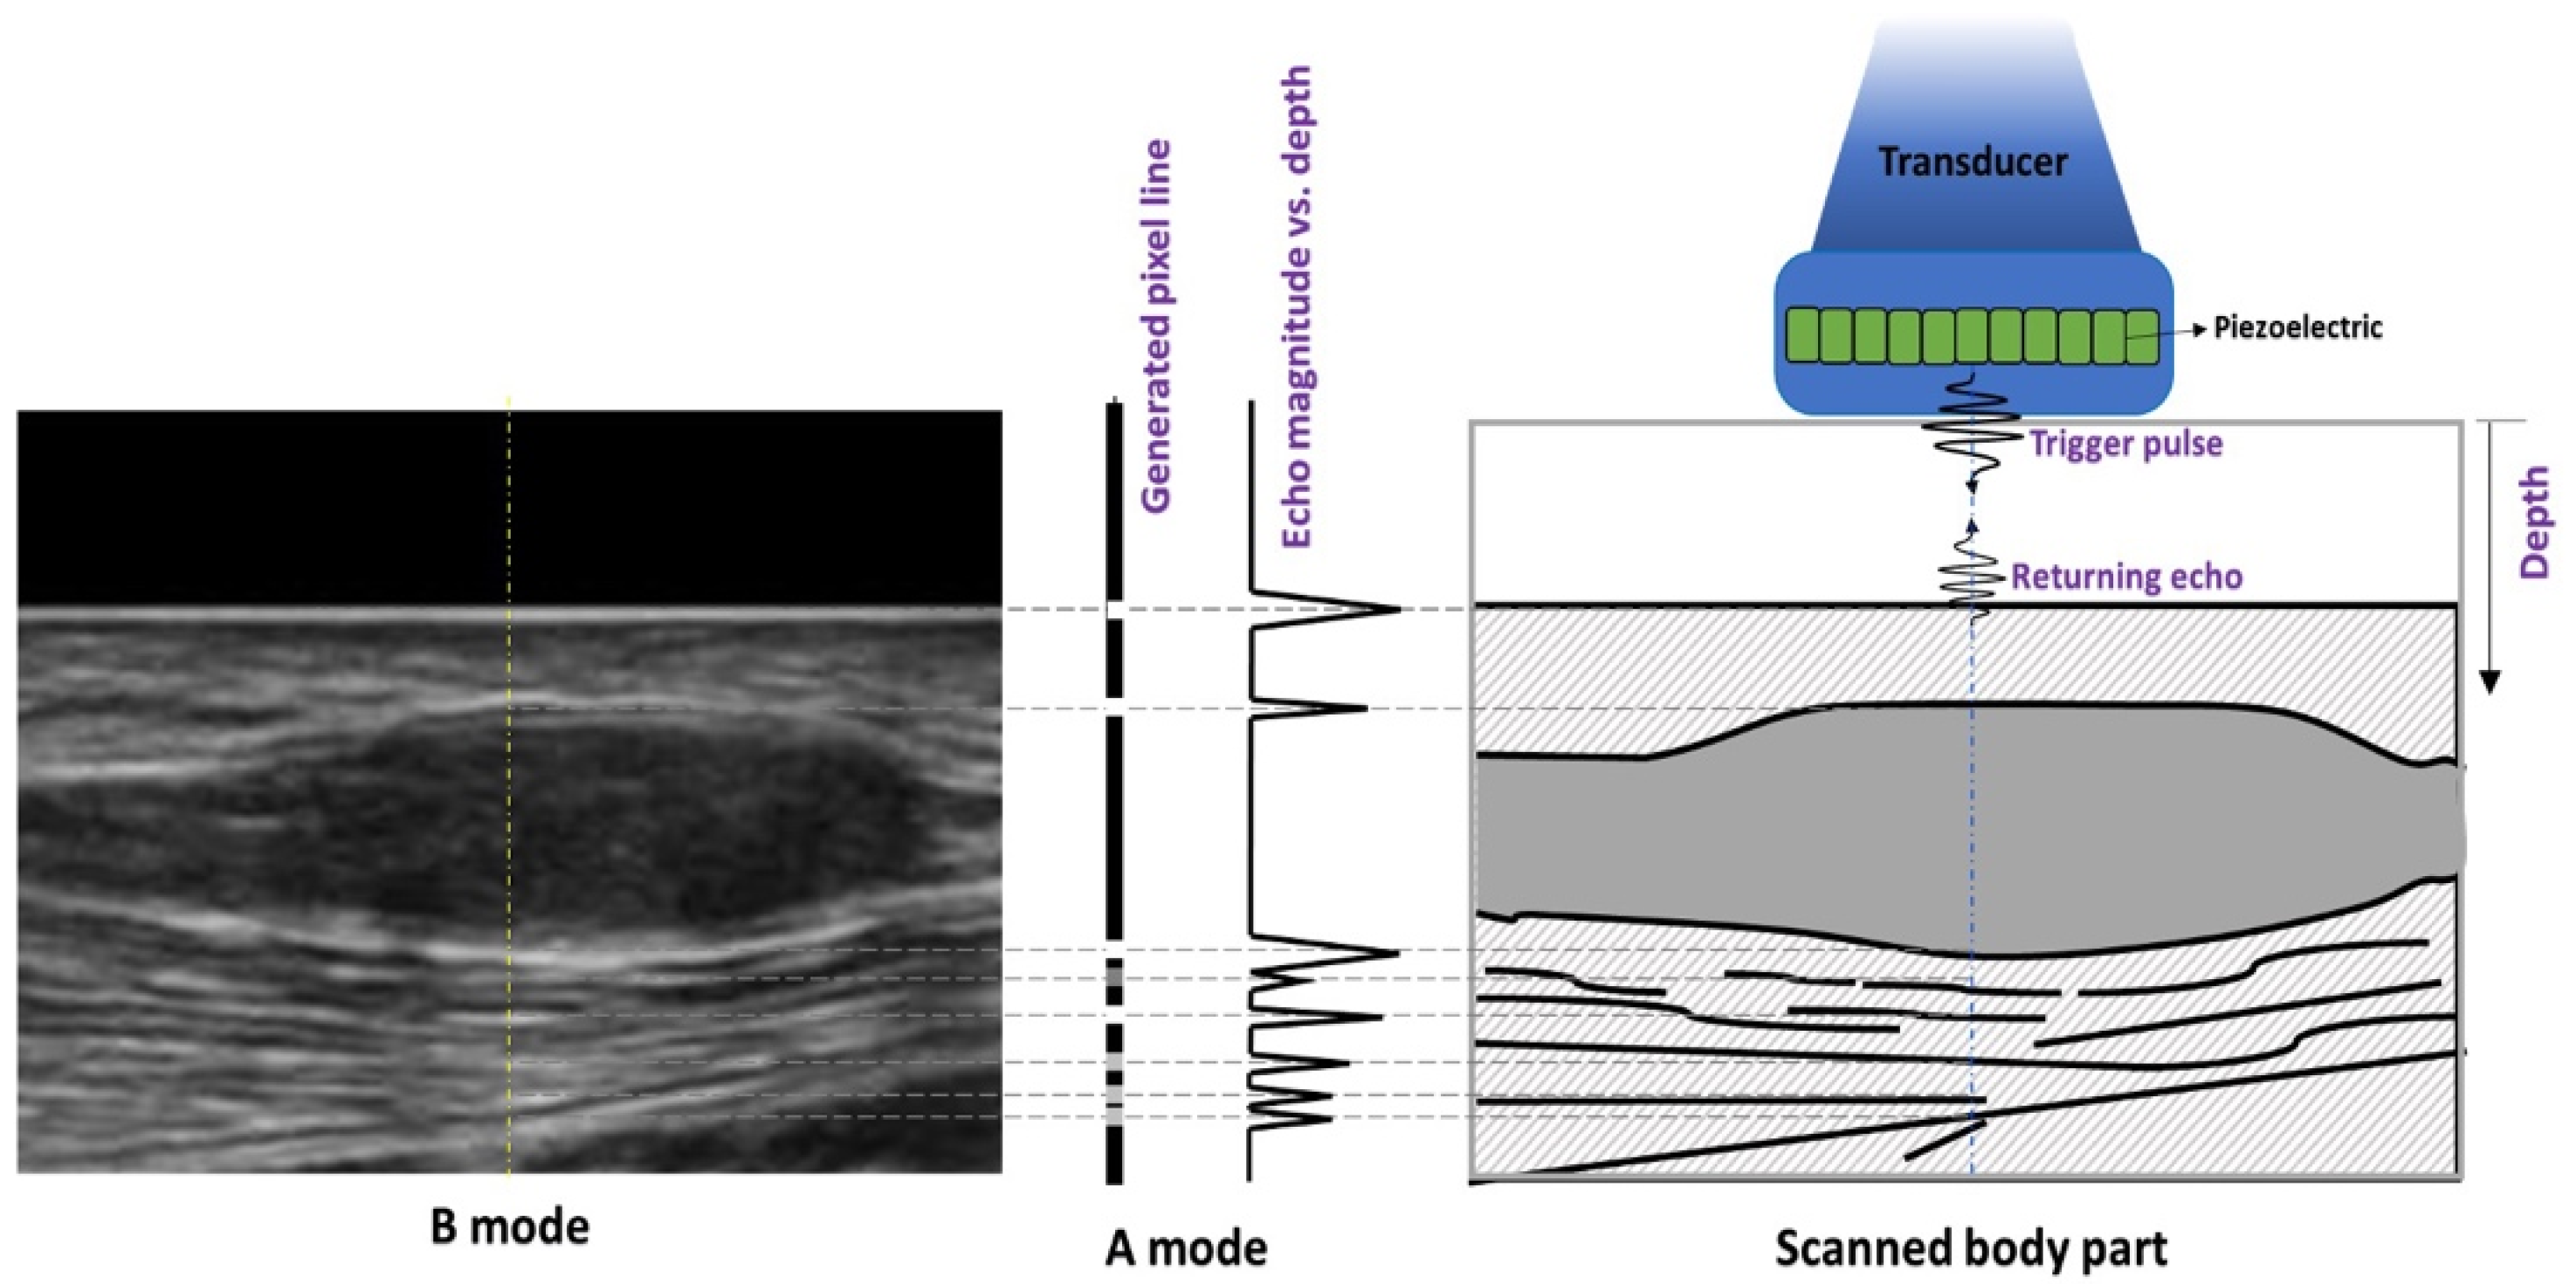 Amplitude envelope curve and spectrogram of nightingale call types